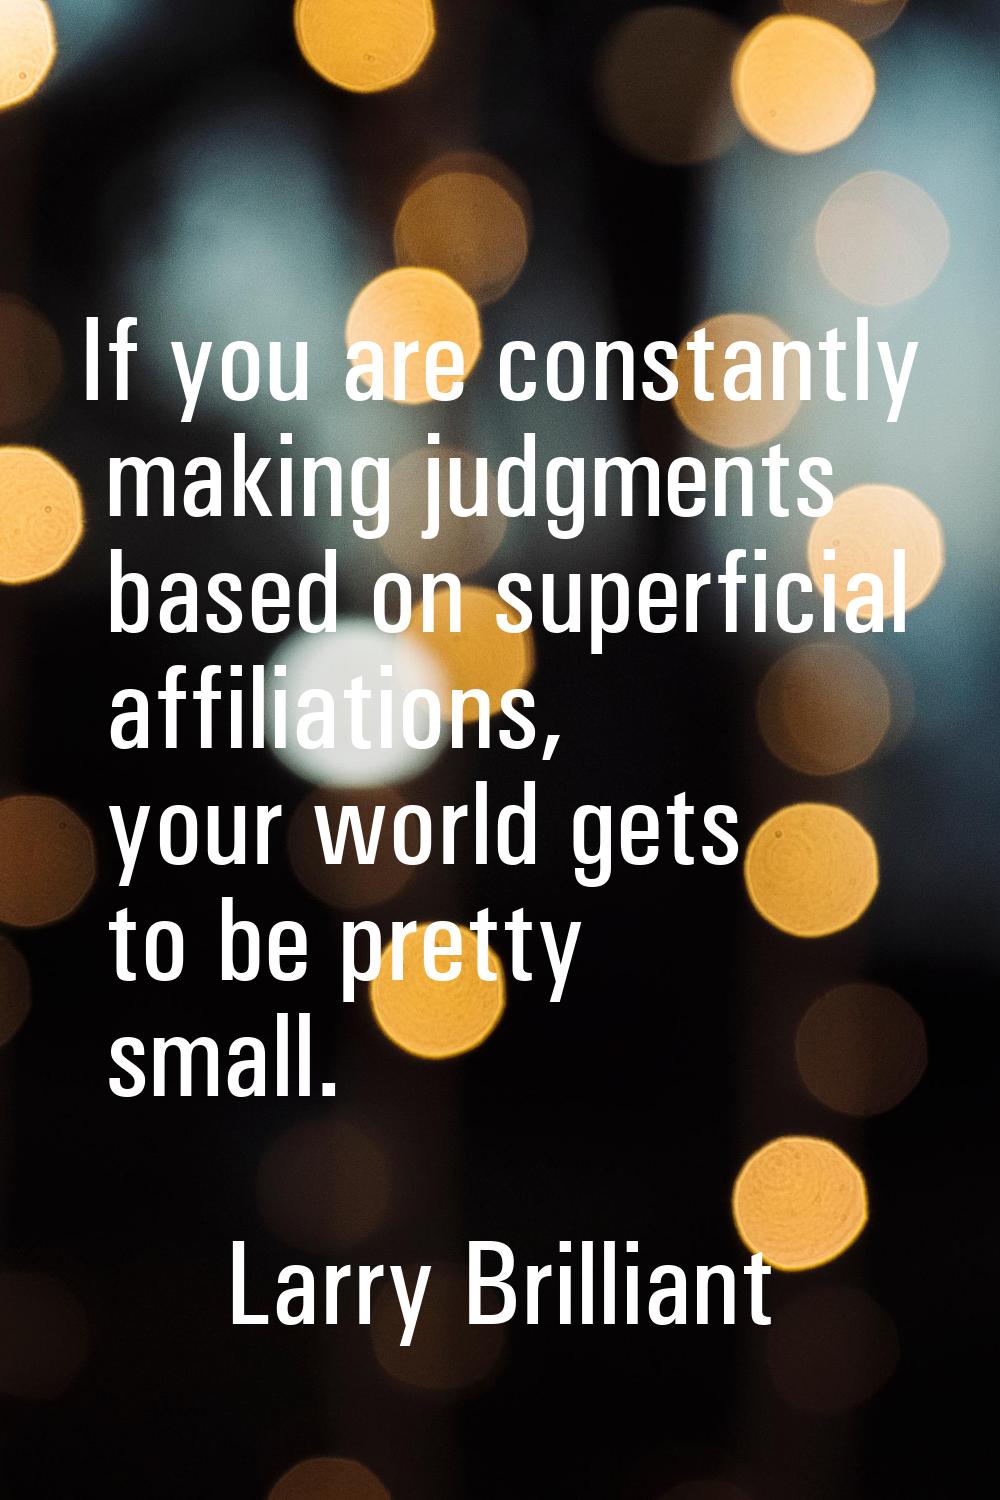 If you are constantly making judgments based on superficial affiliations, your world gets to be pre